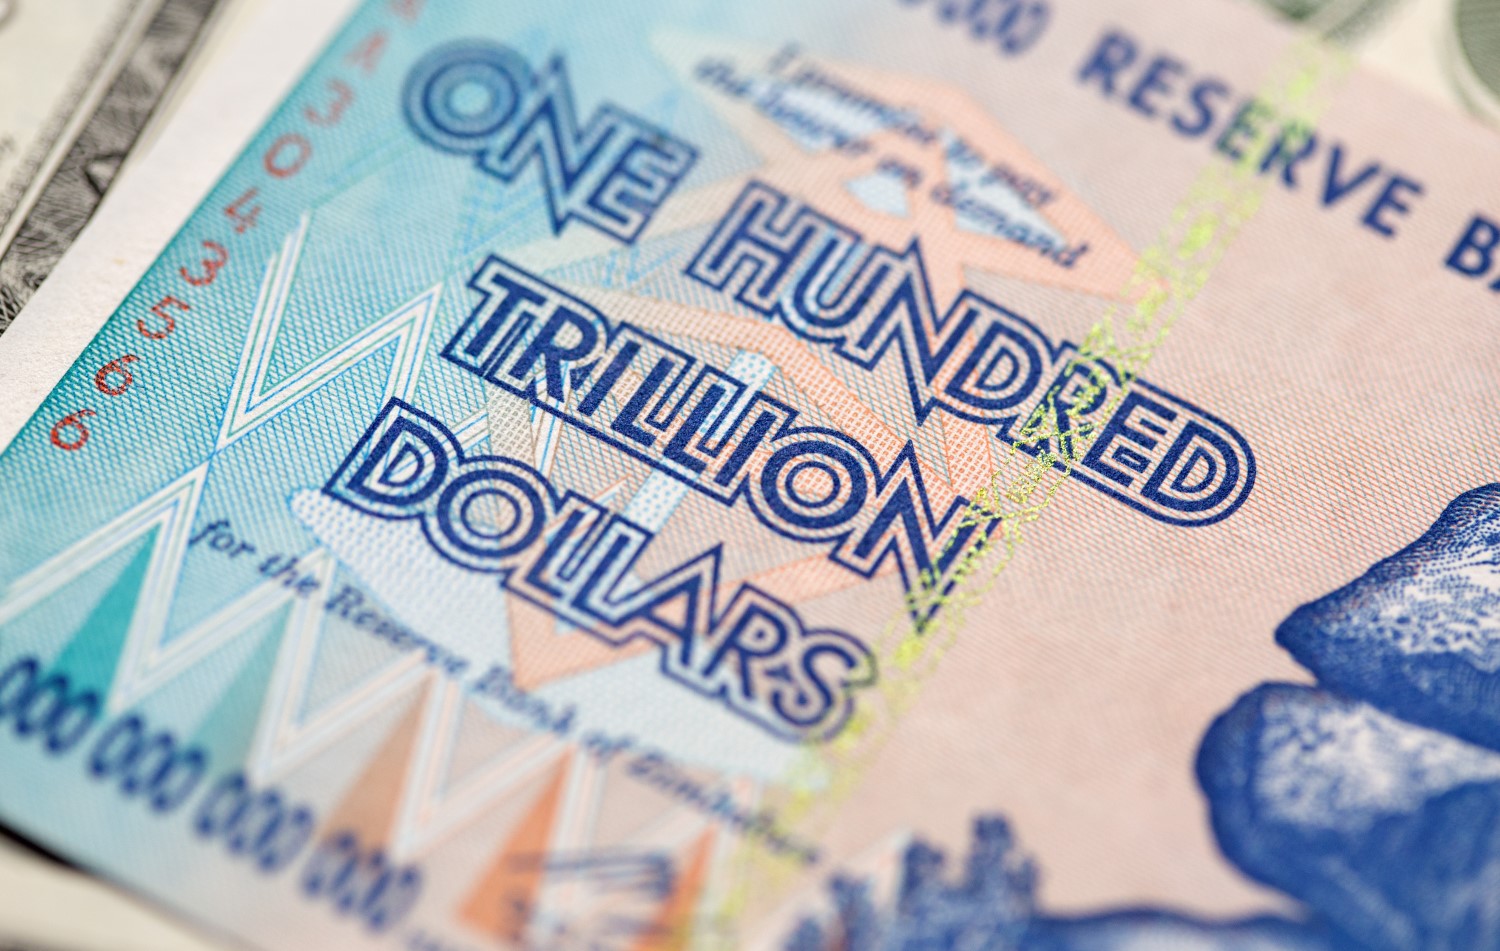 Zimbabwe Halts Mobile Transactions as Hyperinflation Spurs Currency Flight - CoinDesk